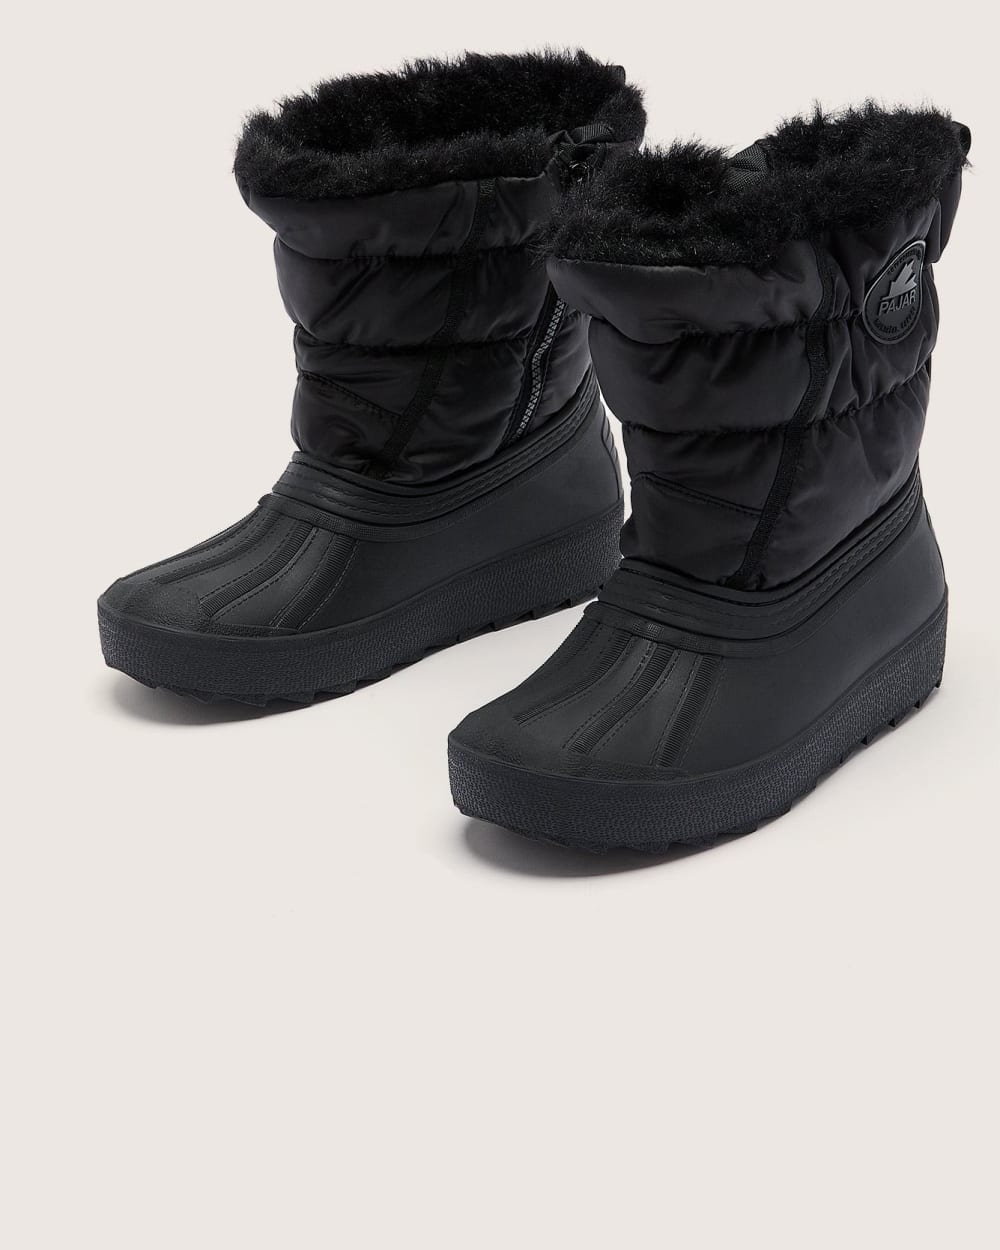 Wide-Width, Spacey Mid-Calf Boots - Pajar | Penningtons